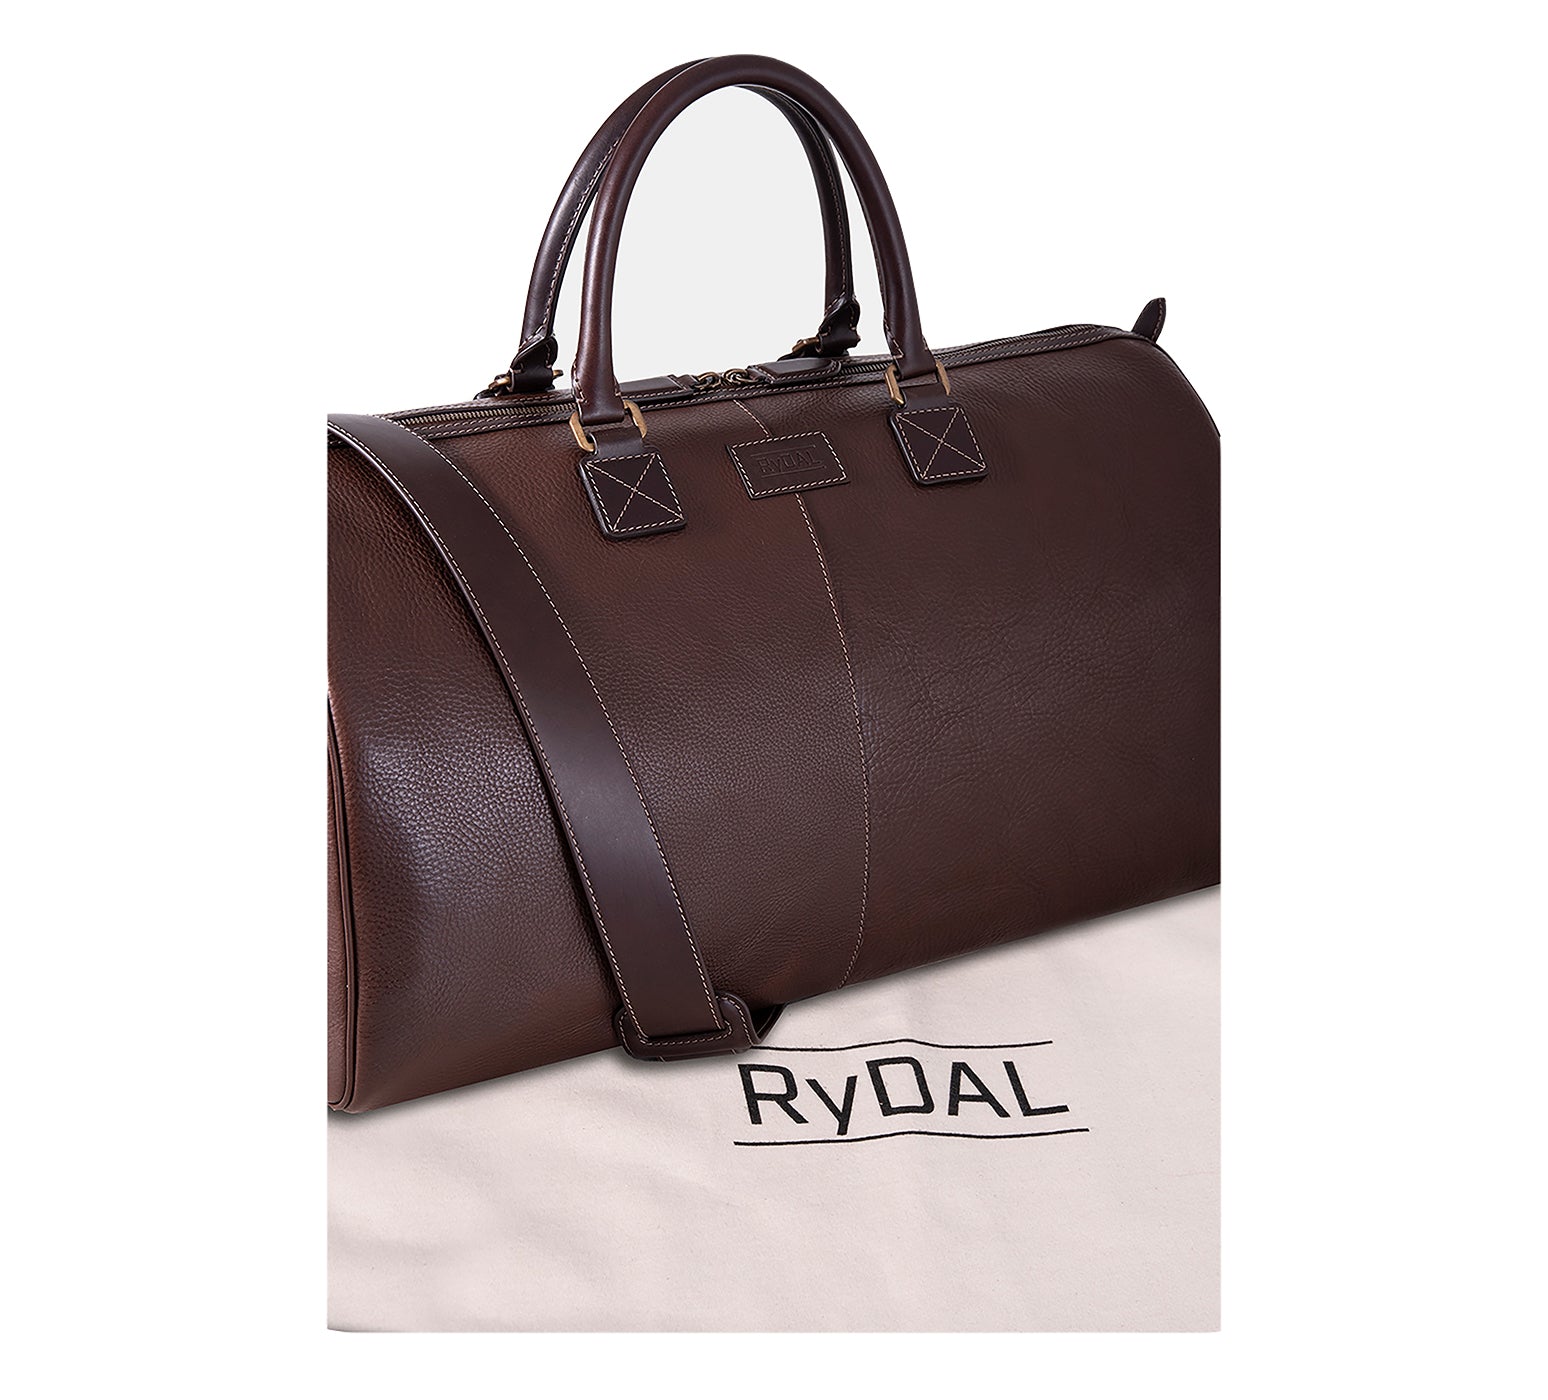 The Portland Mens Leather Travel Bag from Rydal in 'Dark Brown' with cotton bag.